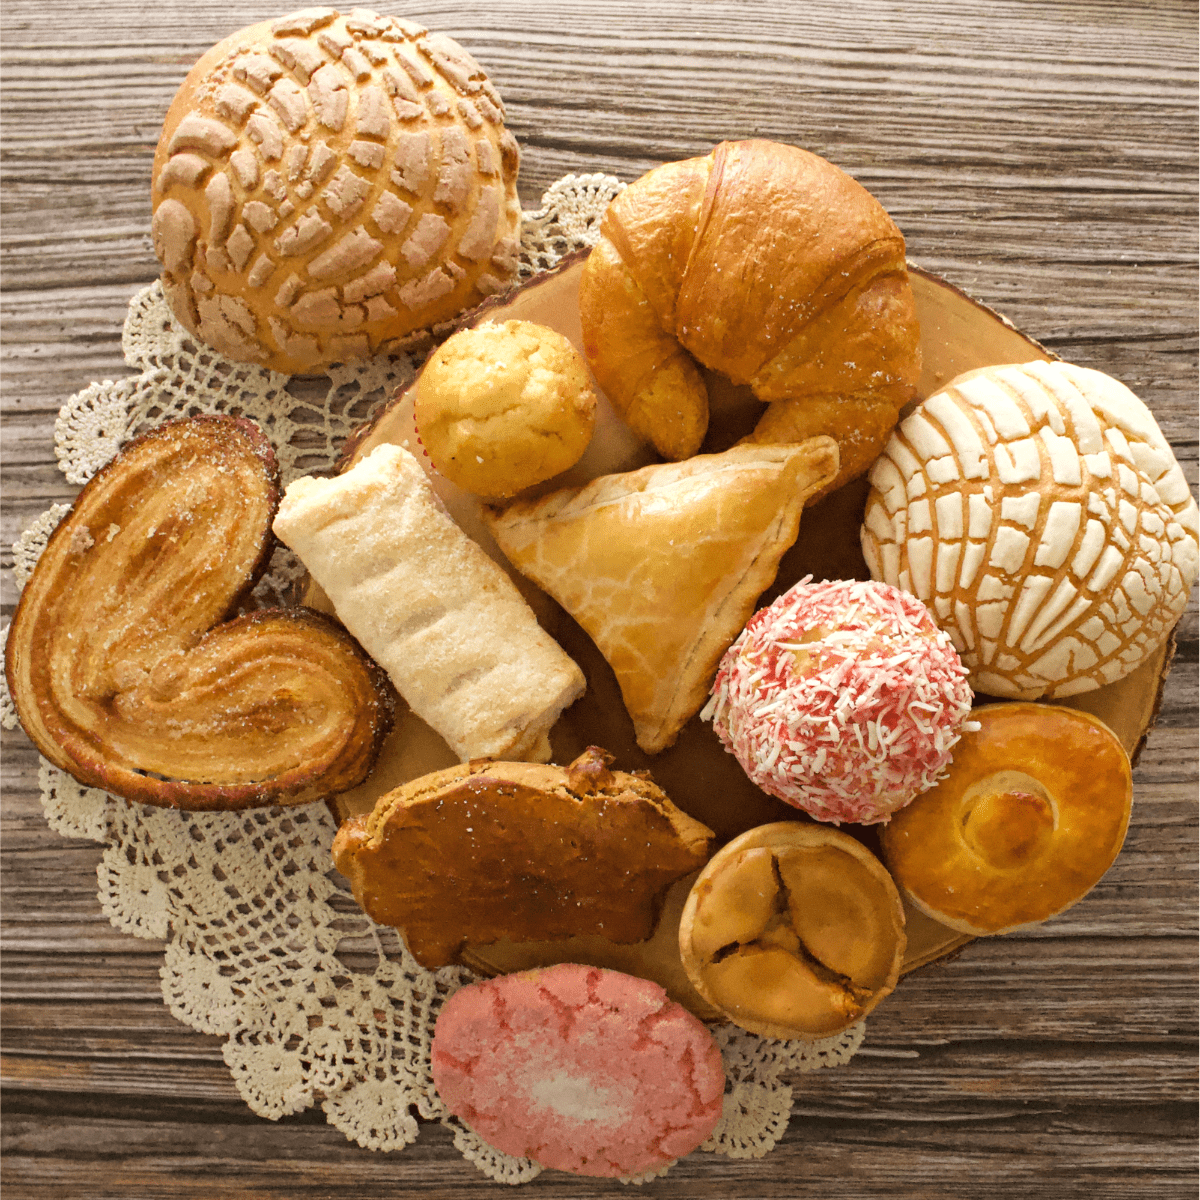 https://inmamamaggieskitchen.com/wp-content/uploads/2022/10/Mexican-Sweet-Breads.png